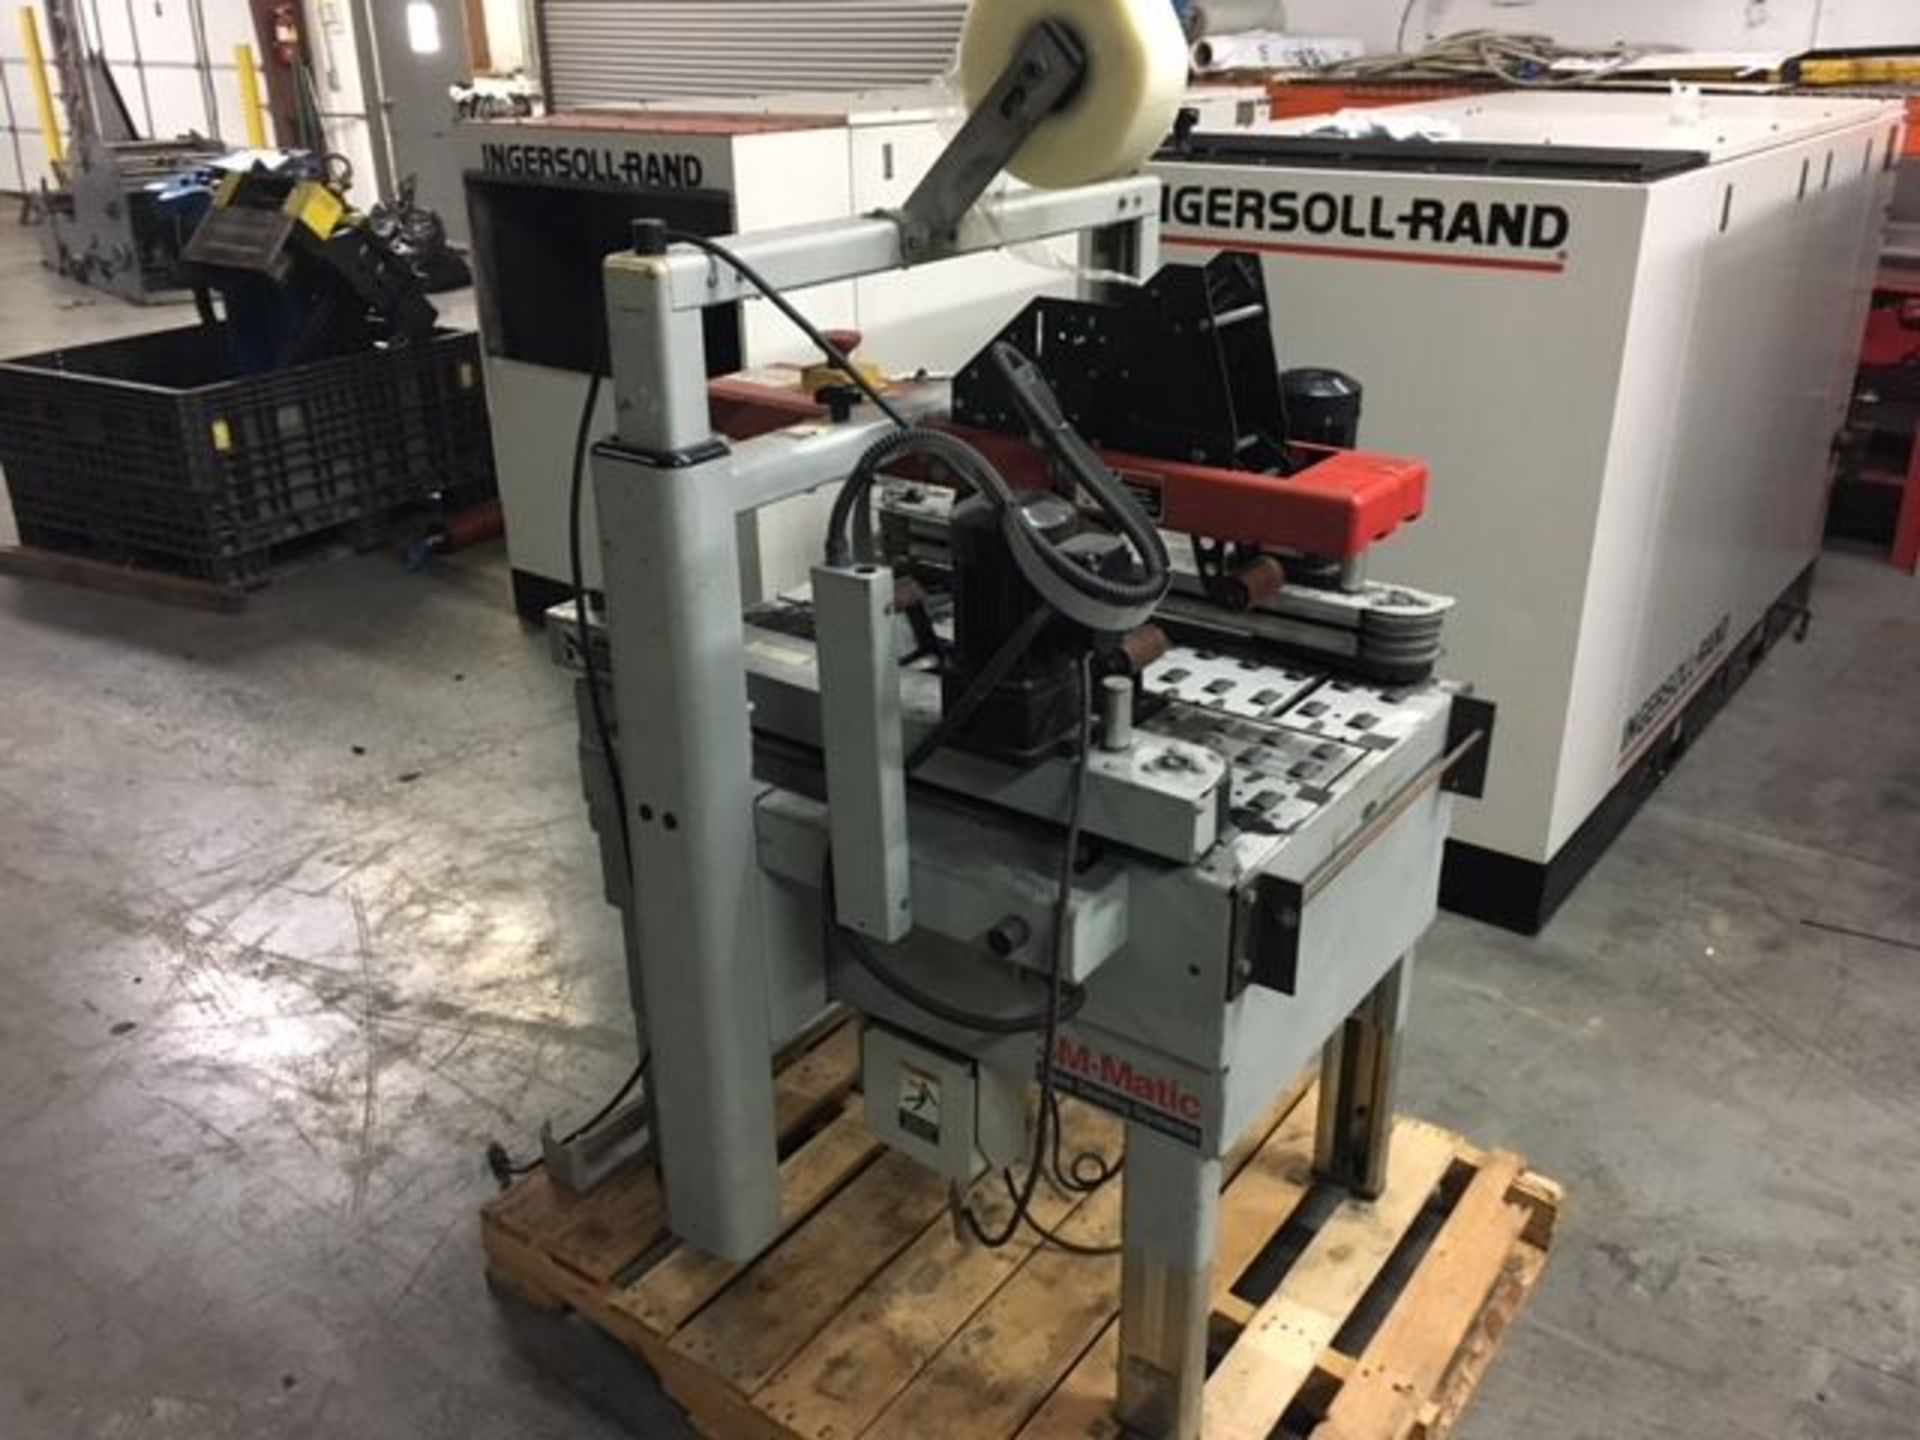 3M-MATIC TYPE 39600 800A3 ADJUSTABLE CASE SEALER; S/N 4860 - LOCATED AT 6600 STOCKTON ROAD,